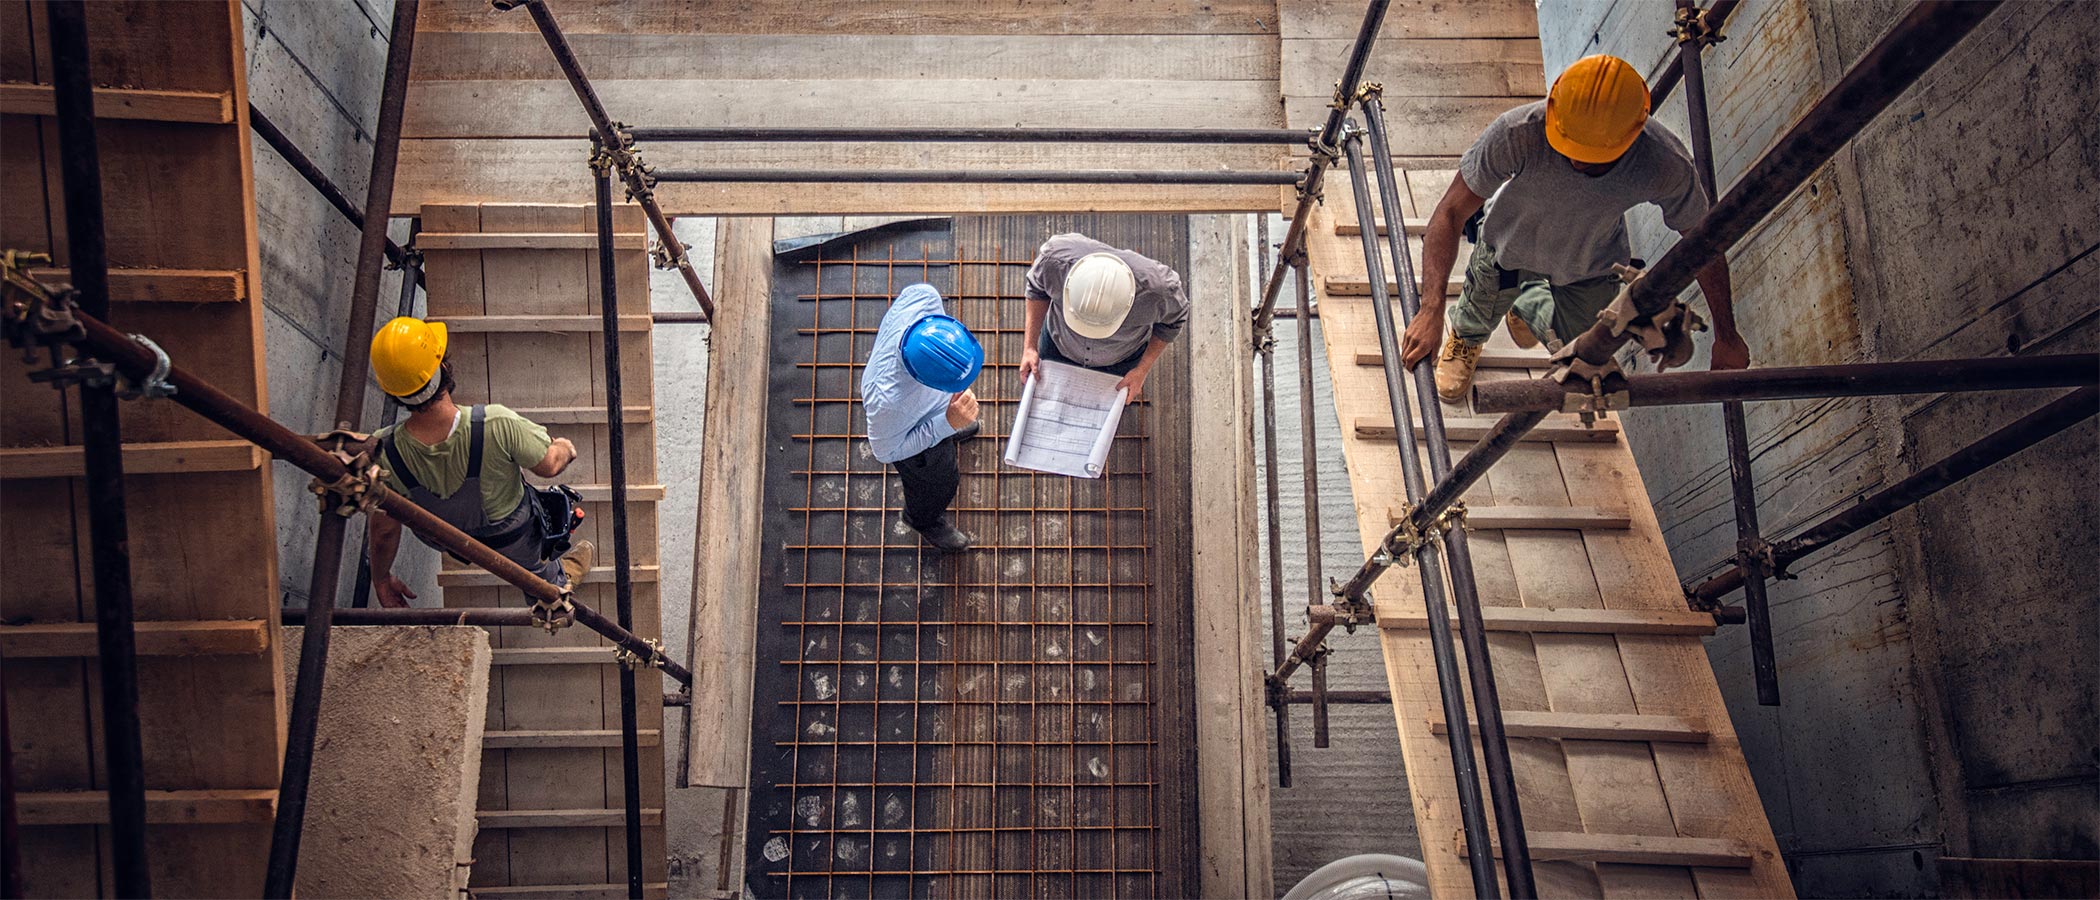 Construction workers and architects at a construction site viewed from above.